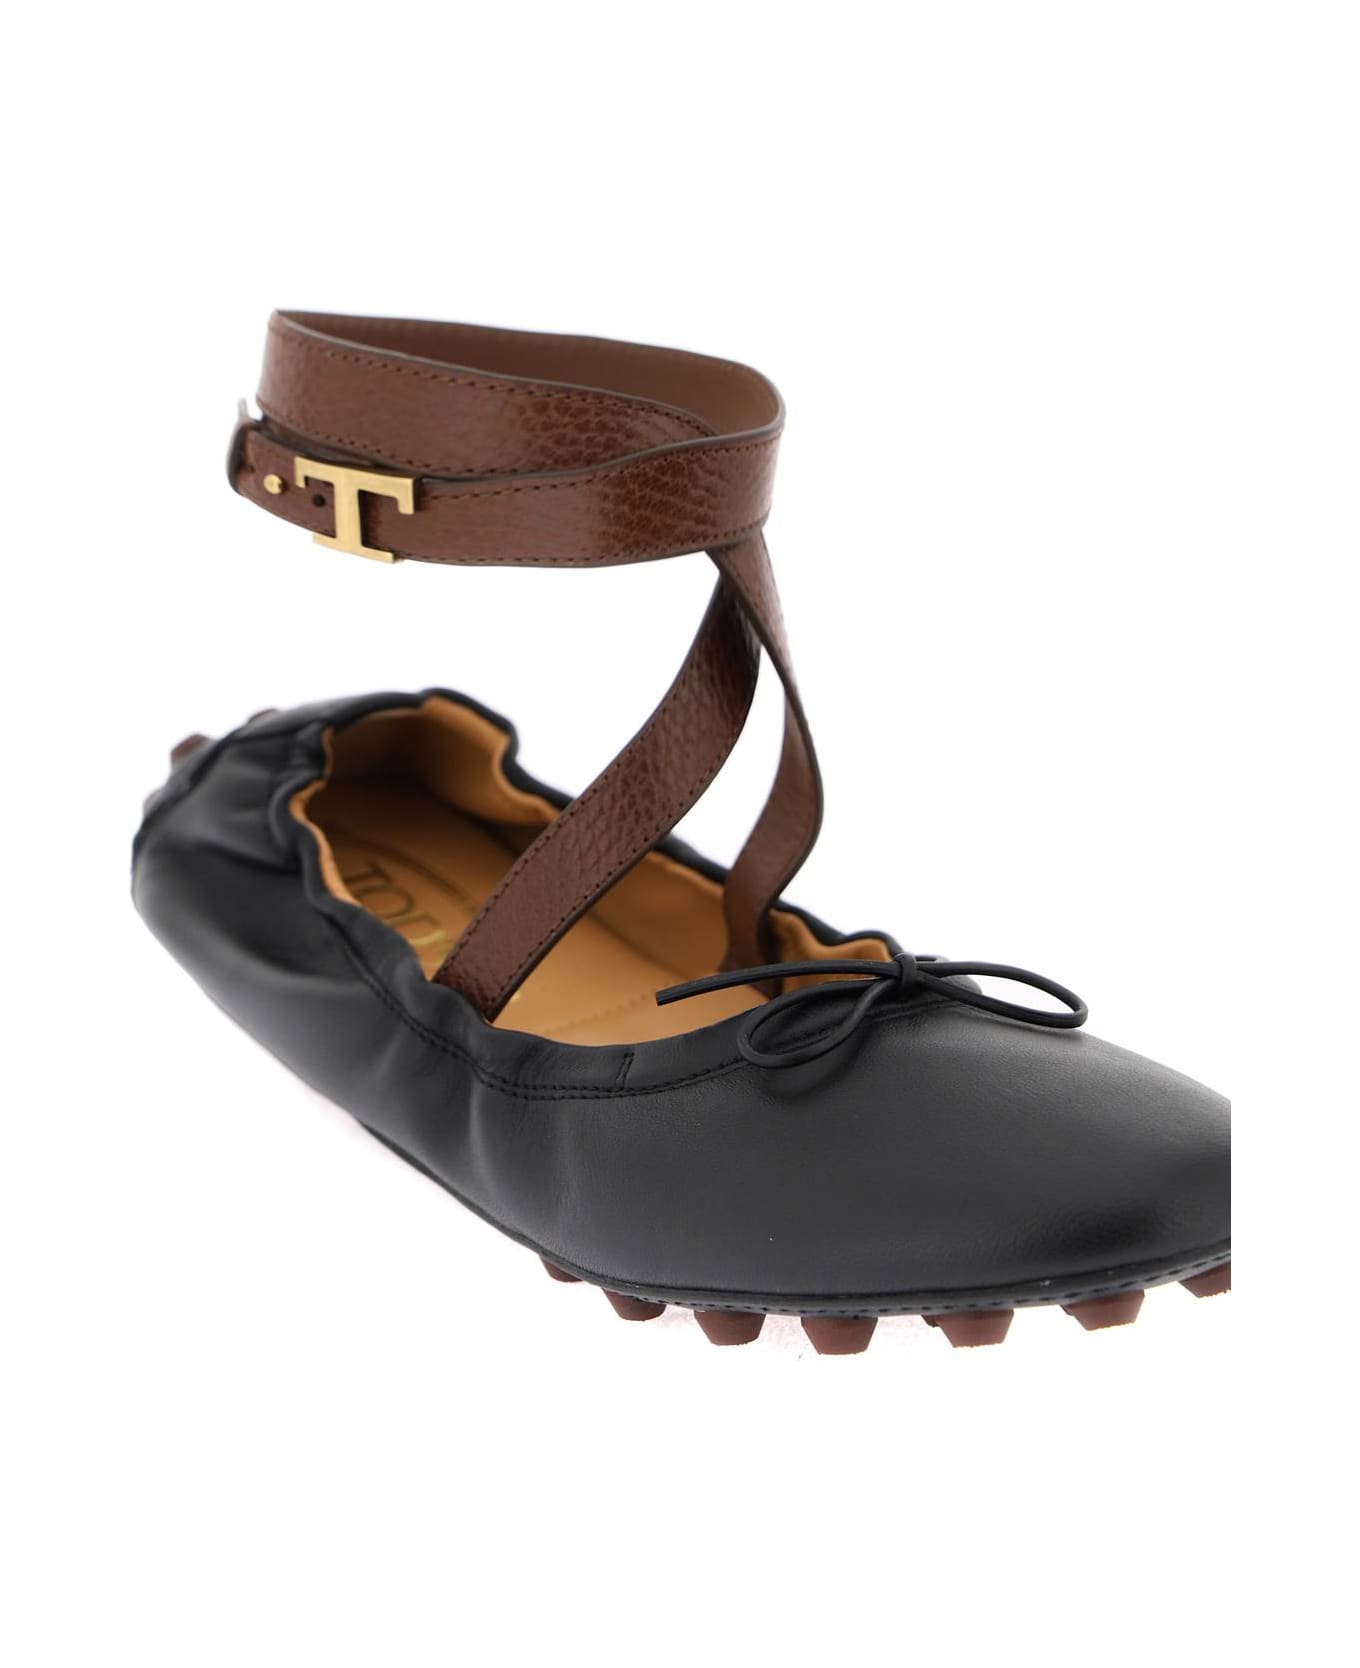 Tod's Bubble Leather Ballet Flats Shoes With Strap - NERO MOGANO (Black)